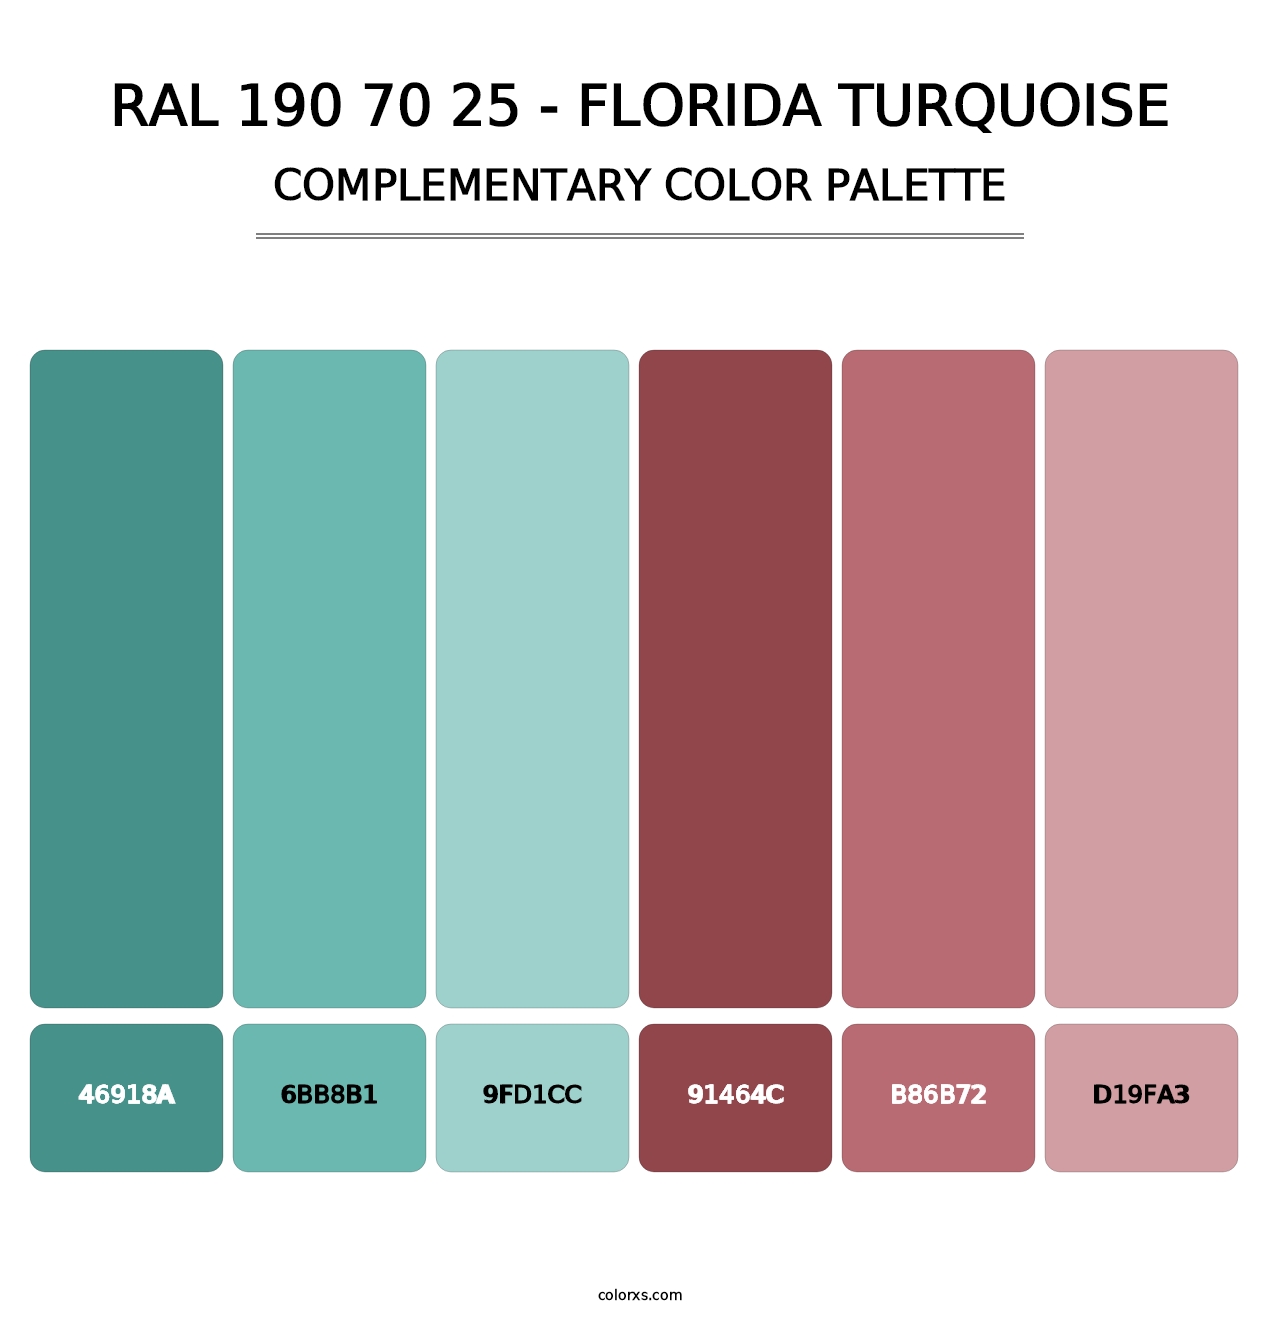 RAL 190 70 25 - Florida Turquoise - Complementary Color Palette